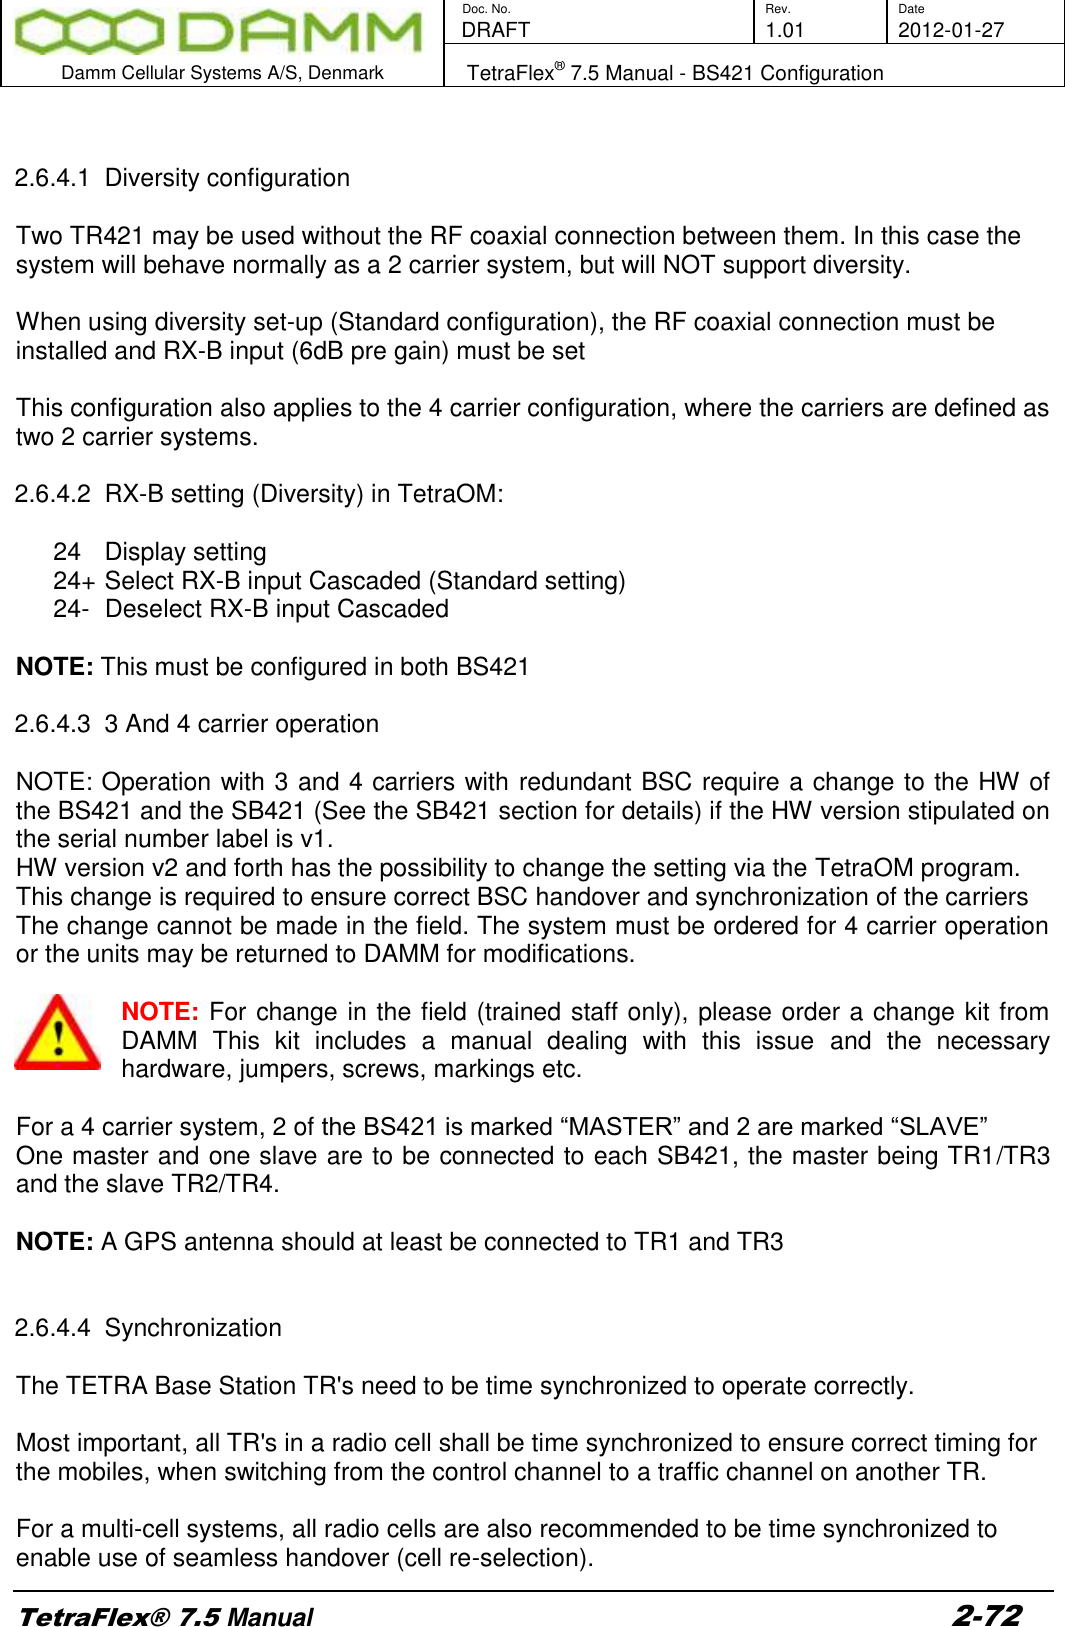        Doc. No. Rev. Date    DRAFT  1.01 2012-01-27  Damm Cellular Systems A/S, Denmark   TetraFlex® 7.5 Manual - BS421 Configuration  TetraFlex® 7.5 Manual 2-72   2.6.4.1  Diversity configuration   Two TR421 may be used without the RF coaxial connection between them. In this case the system will behave normally as a 2 carrier system, but will NOT support diversity.  When using diversity set-up (Standard configuration), the RF coaxial connection must be installed and RX-B input (6dB pre gain) must be set   This configuration also applies to the 4 carrier configuration, where the carriers are defined as two 2 carrier systems.  2.6.4.2  RX-B setting (Diversity) in TetraOM:  24  Display setting 24+ Select RX-B input Cascaded (Standard setting) 24-  Deselect RX-B input Cascaded   NOTE: This must be configured in both BS421    2.6.4.3  3 And 4 carrier operation  NOTE: Operation with 3 and 4 carriers with redundant BSC require a change to the HW of the BS421 and the SB421 (See the SB421 section for details) if the HW version stipulated on the serial number label is v1. HW version v2 and forth has the possibility to change the setting via the TetraOM program. This change is required to ensure correct BSC handover and synchronization of the carriers The change cannot be made in the field. The system must be ordered for 4 carrier operation or the units may be returned to DAMM for modifications.  NOTE: For change in the field (trained staff only), please order a change kit from DAMM  This  kit  includes  a  manual  dealing  with  this  issue  and  the  necessary hardware, jumpers, screws, markings etc.  For a 4 carrier system, 2 of the BS421 is marked “MASTER” and 2 are marked “SLAVE” One master and one slave are to be connected to each SB421, the master being TR1/TR3 and the slave TR2/TR4.  NOTE: A GPS antenna should at least be connected to TR1 and TR3   2.6.4.4  Synchronization  The TETRA Base Station TR&apos;s need to be time synchronized to operate correctly.  Most important, all TR&apos;s in a radio cell shall be time synchronized to ensure correct timing for the mobiles, when switching from the control channel to a traffic channel on another TR.  For a multi-cell systems, all radio cells are also recommended to be time synchronized to enable use of seamless handover (cell re-selection). 